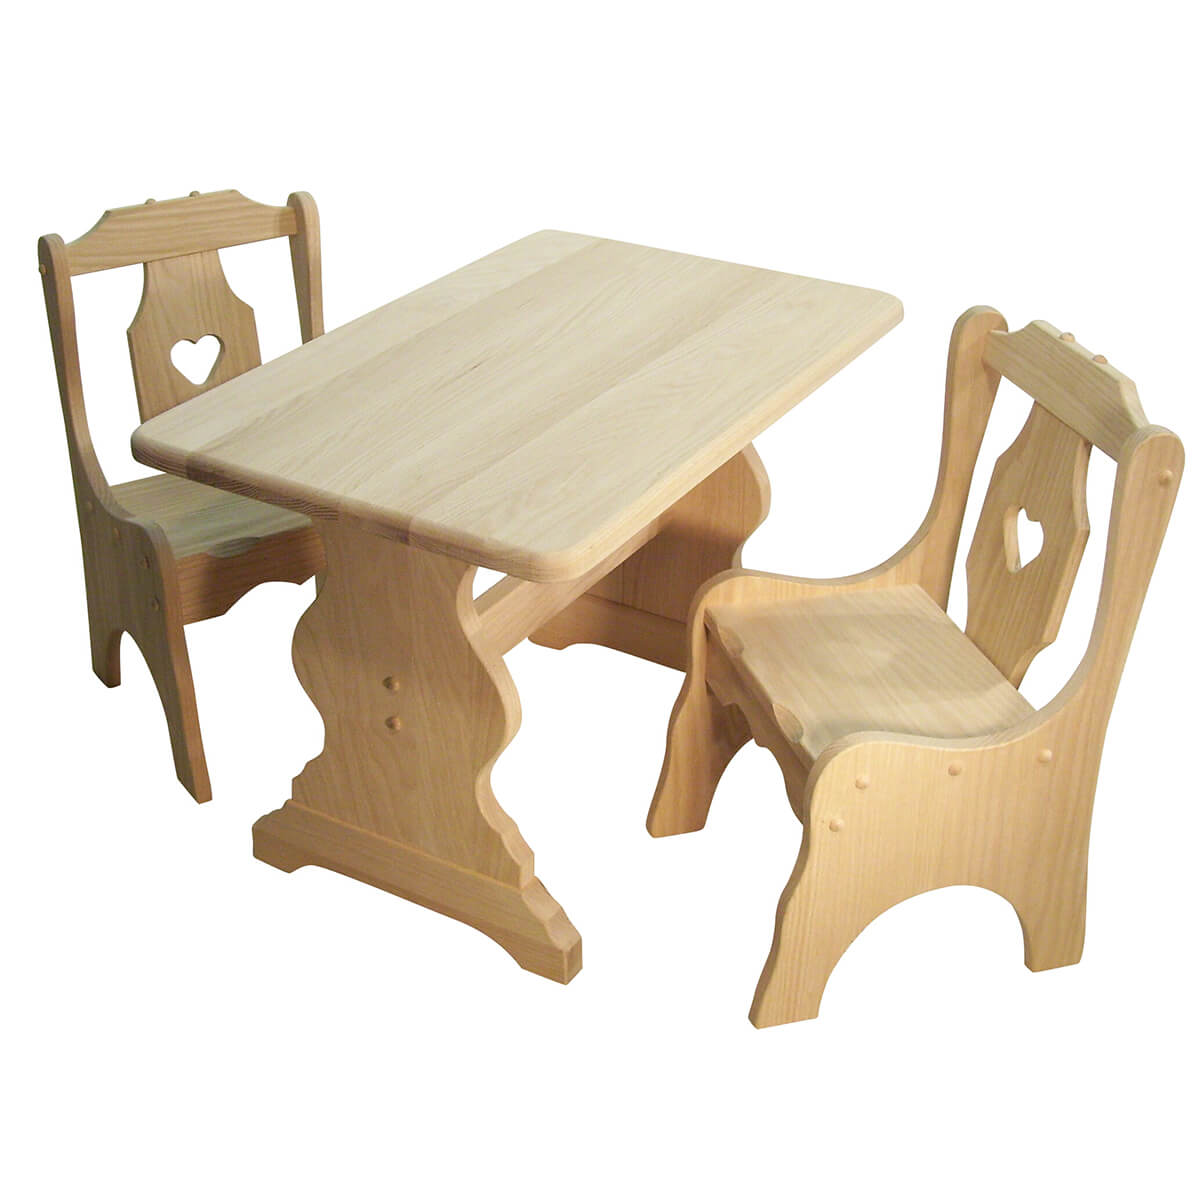 Read more about the article Children’s Table with Chairs